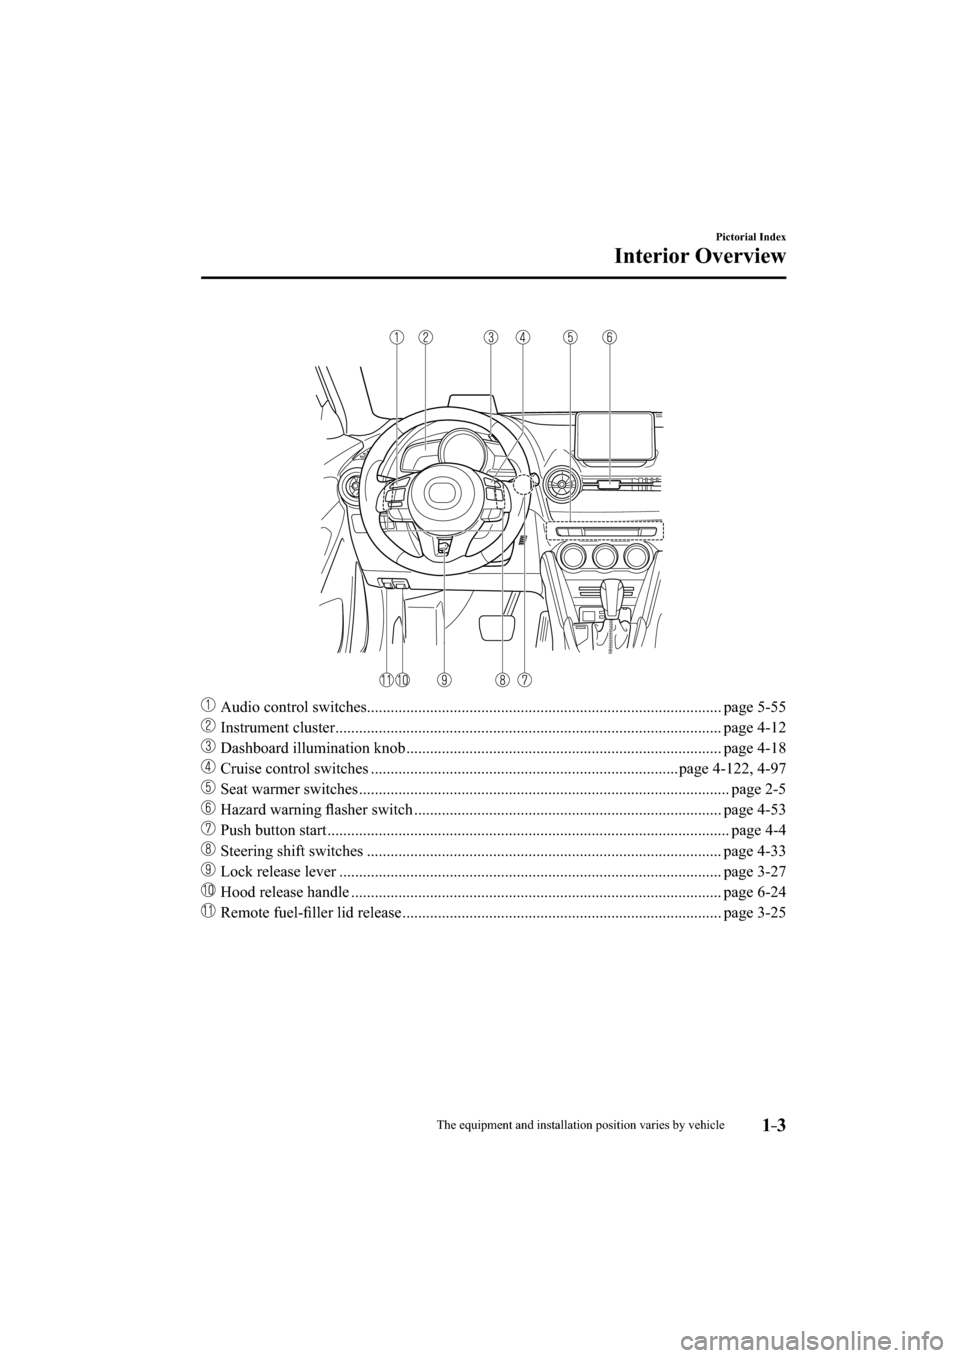 MAZDA MODEL CX-3 2016  Owners Manual (in English) 1–3
Pictorial Index
Interior Overview
���  Audio control switches.......................................................................................... page  5-55
��
  Instrument cluster ..